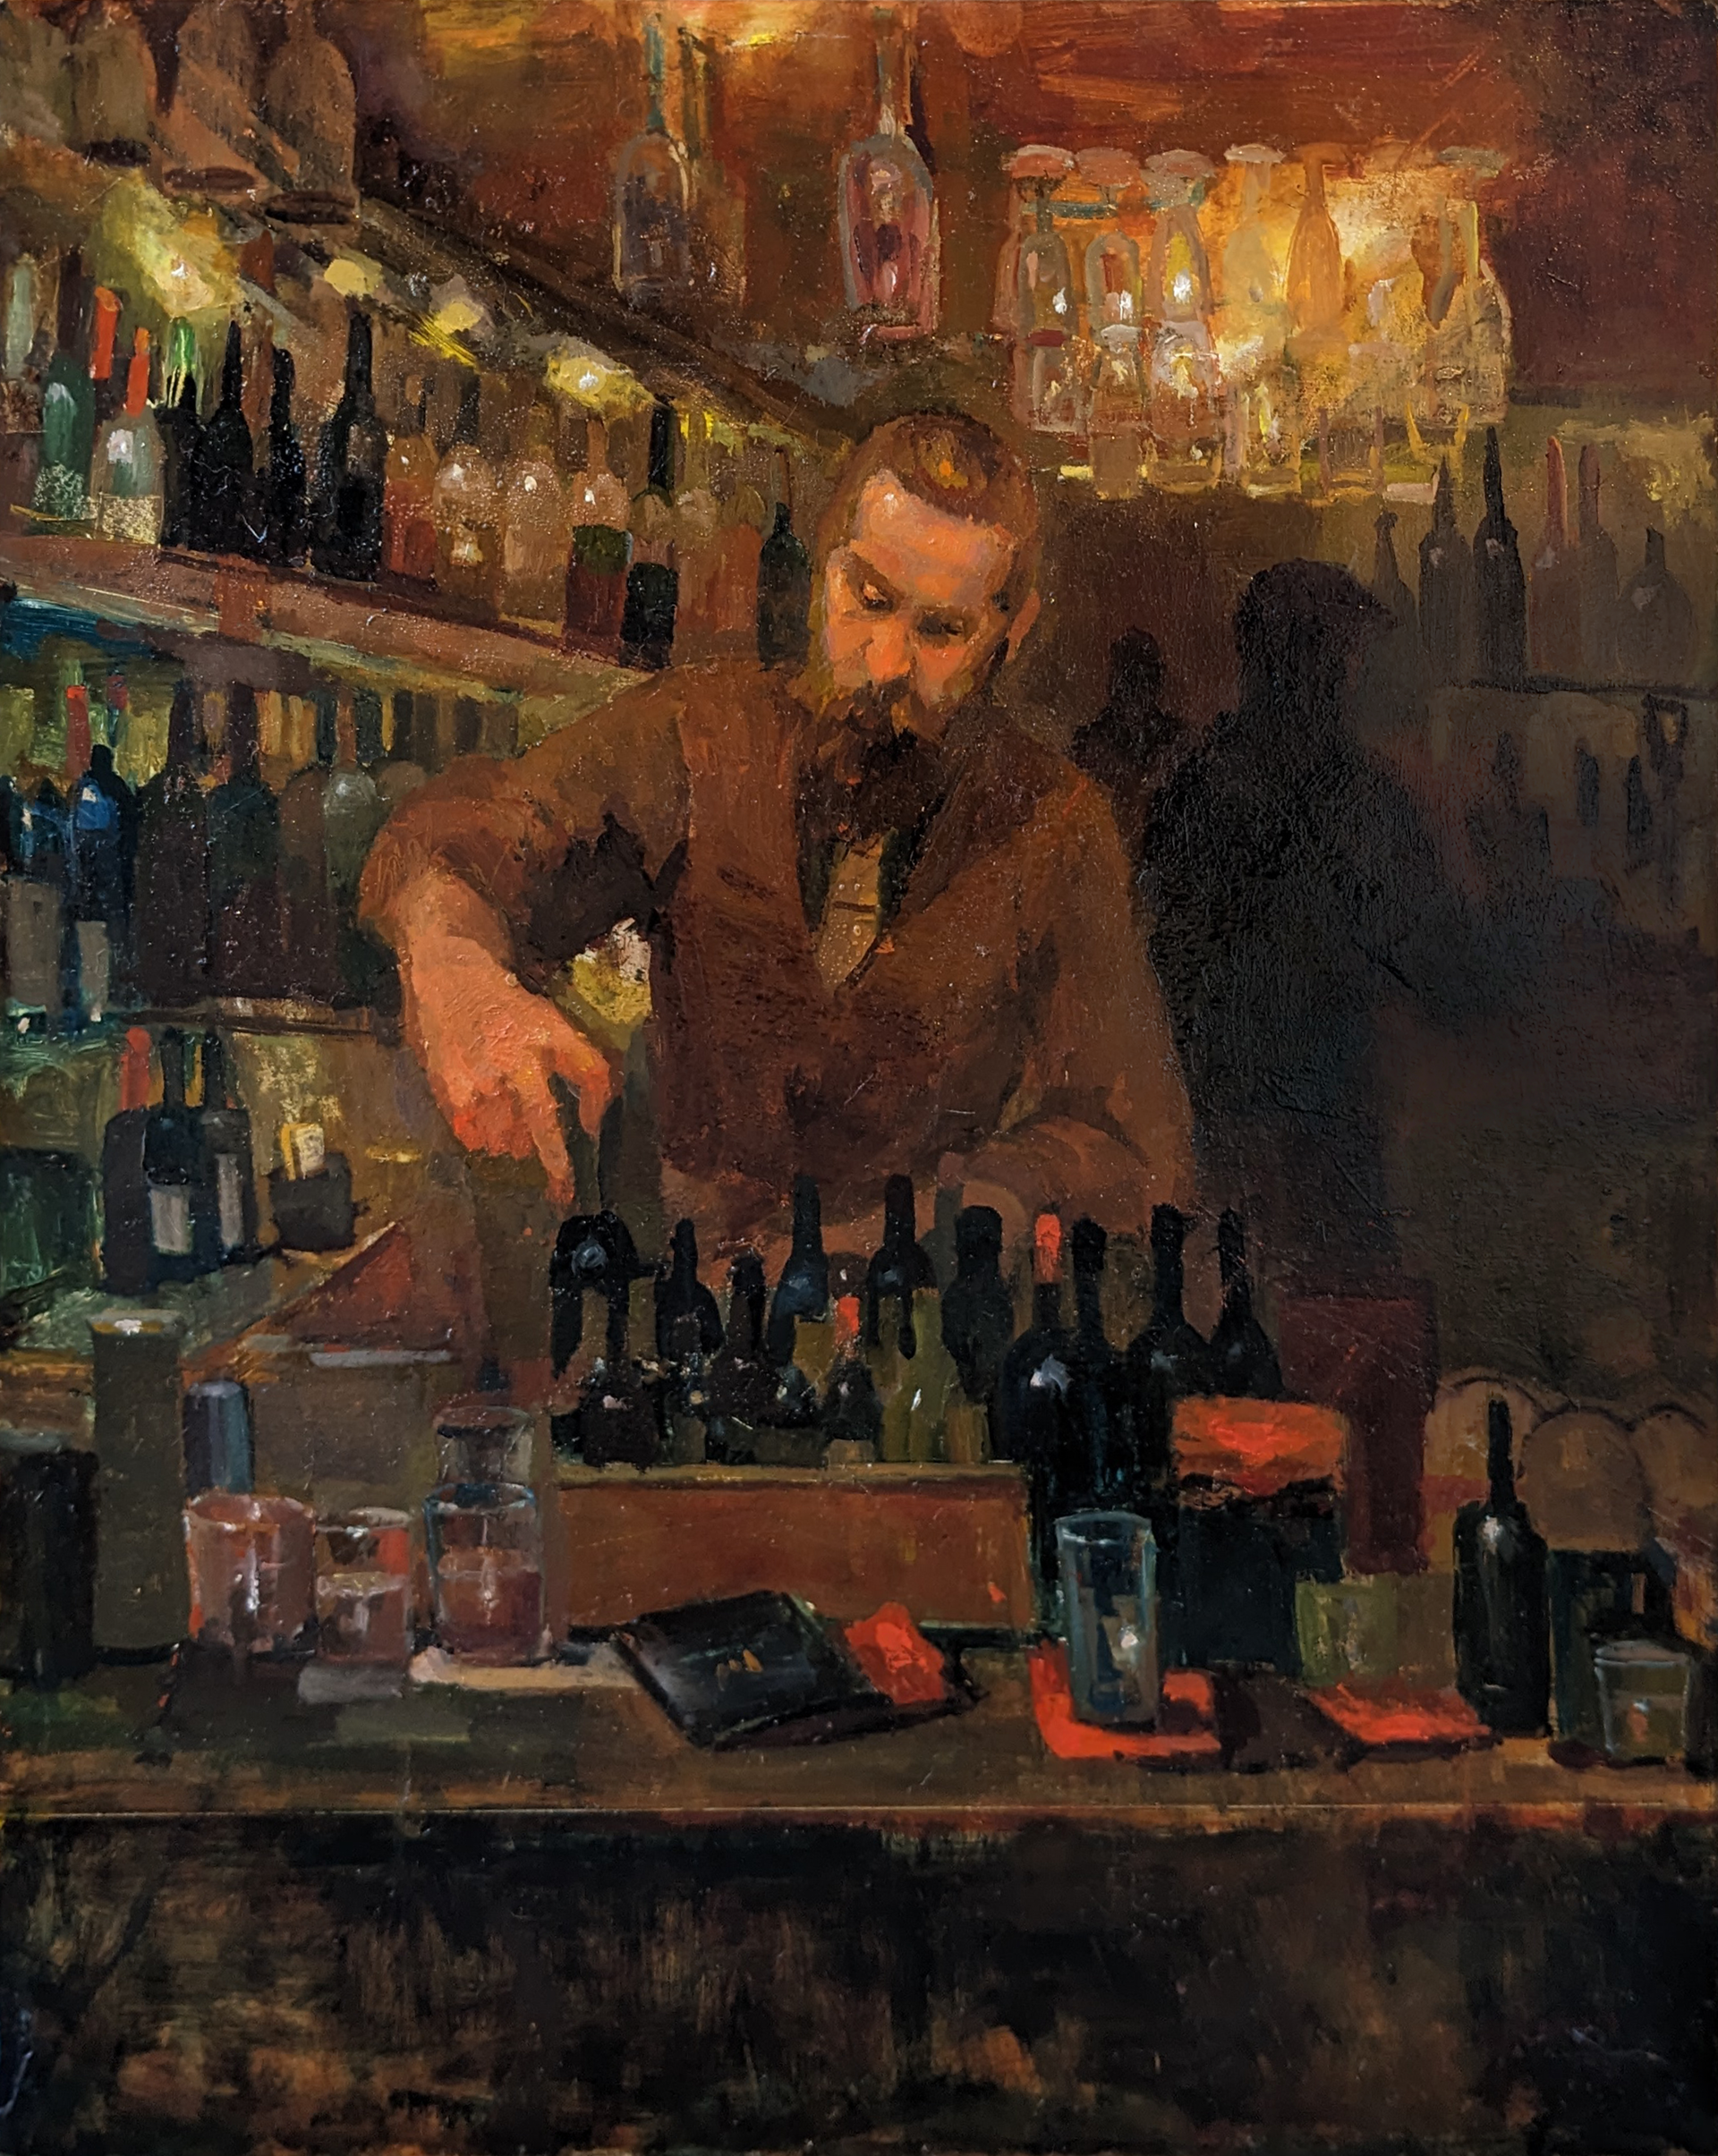 Bartenders by Stacy Kamin